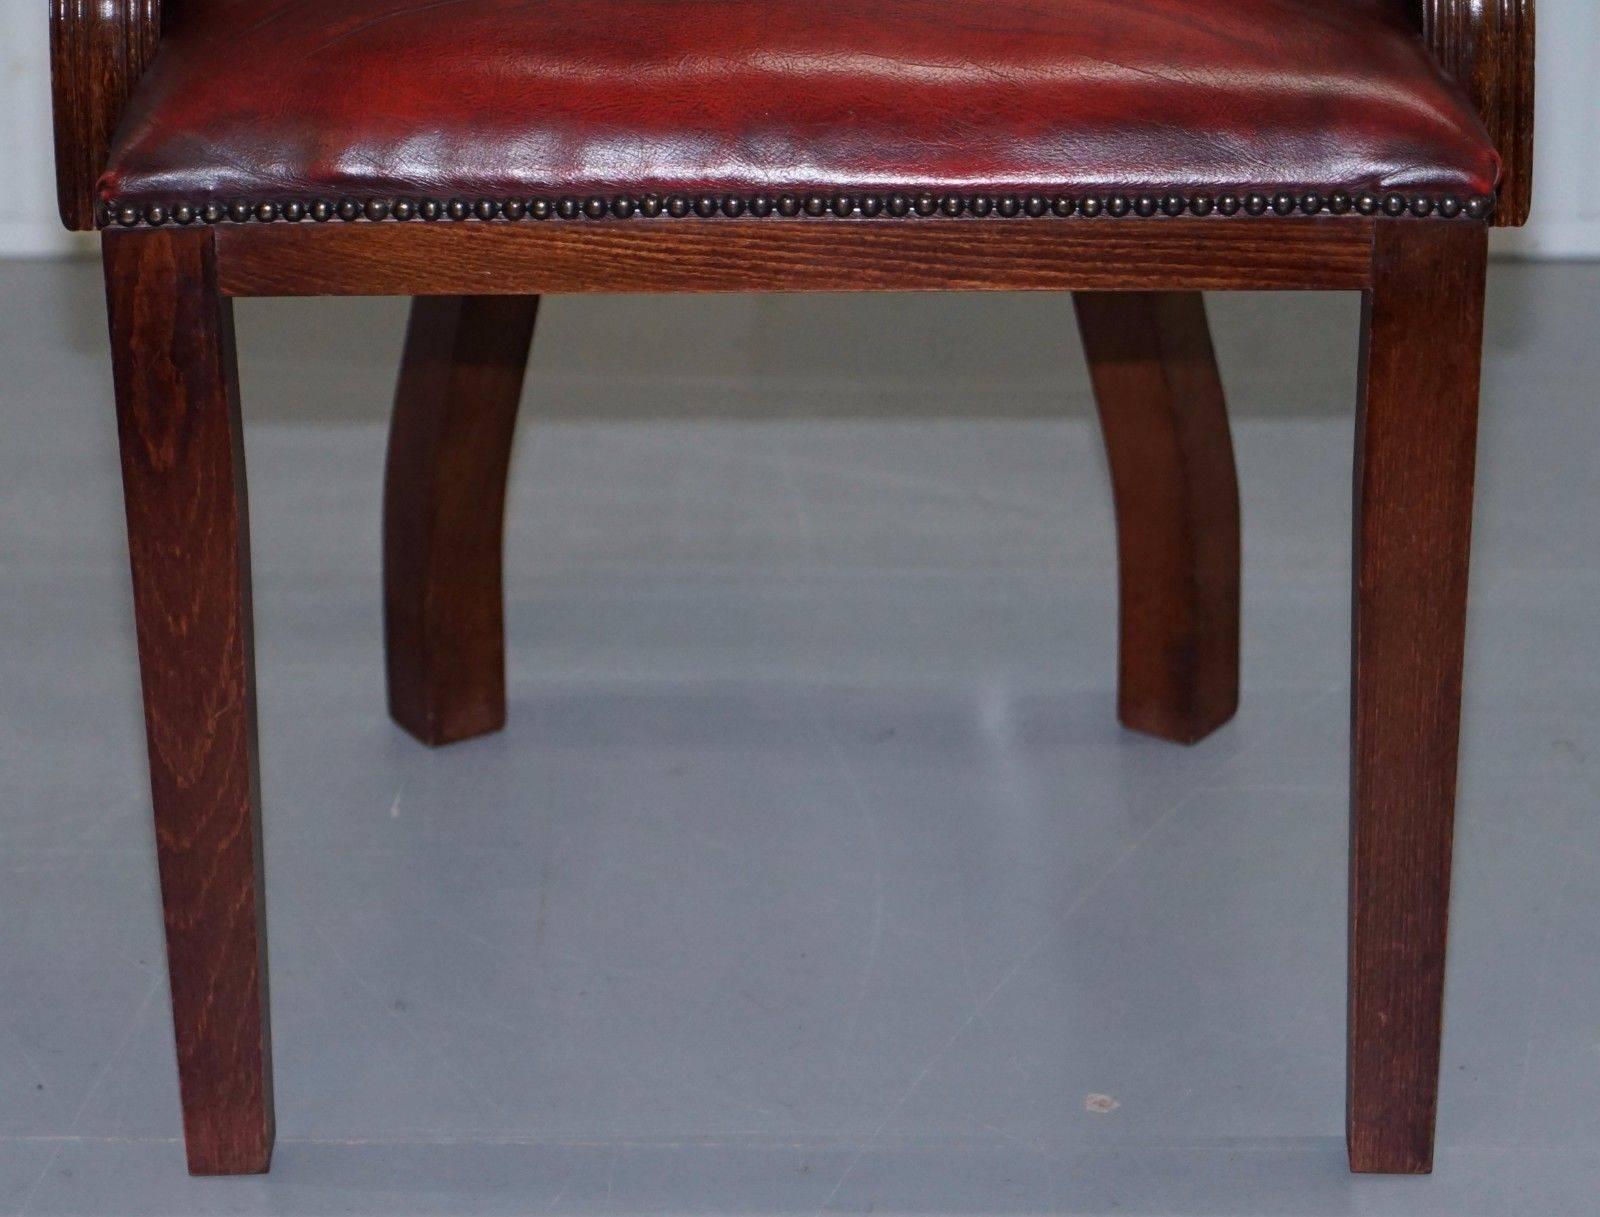 Contemporary Lovely Oxblood Leather Chesterfield Court Chair for Desks or Guests Lovely Find